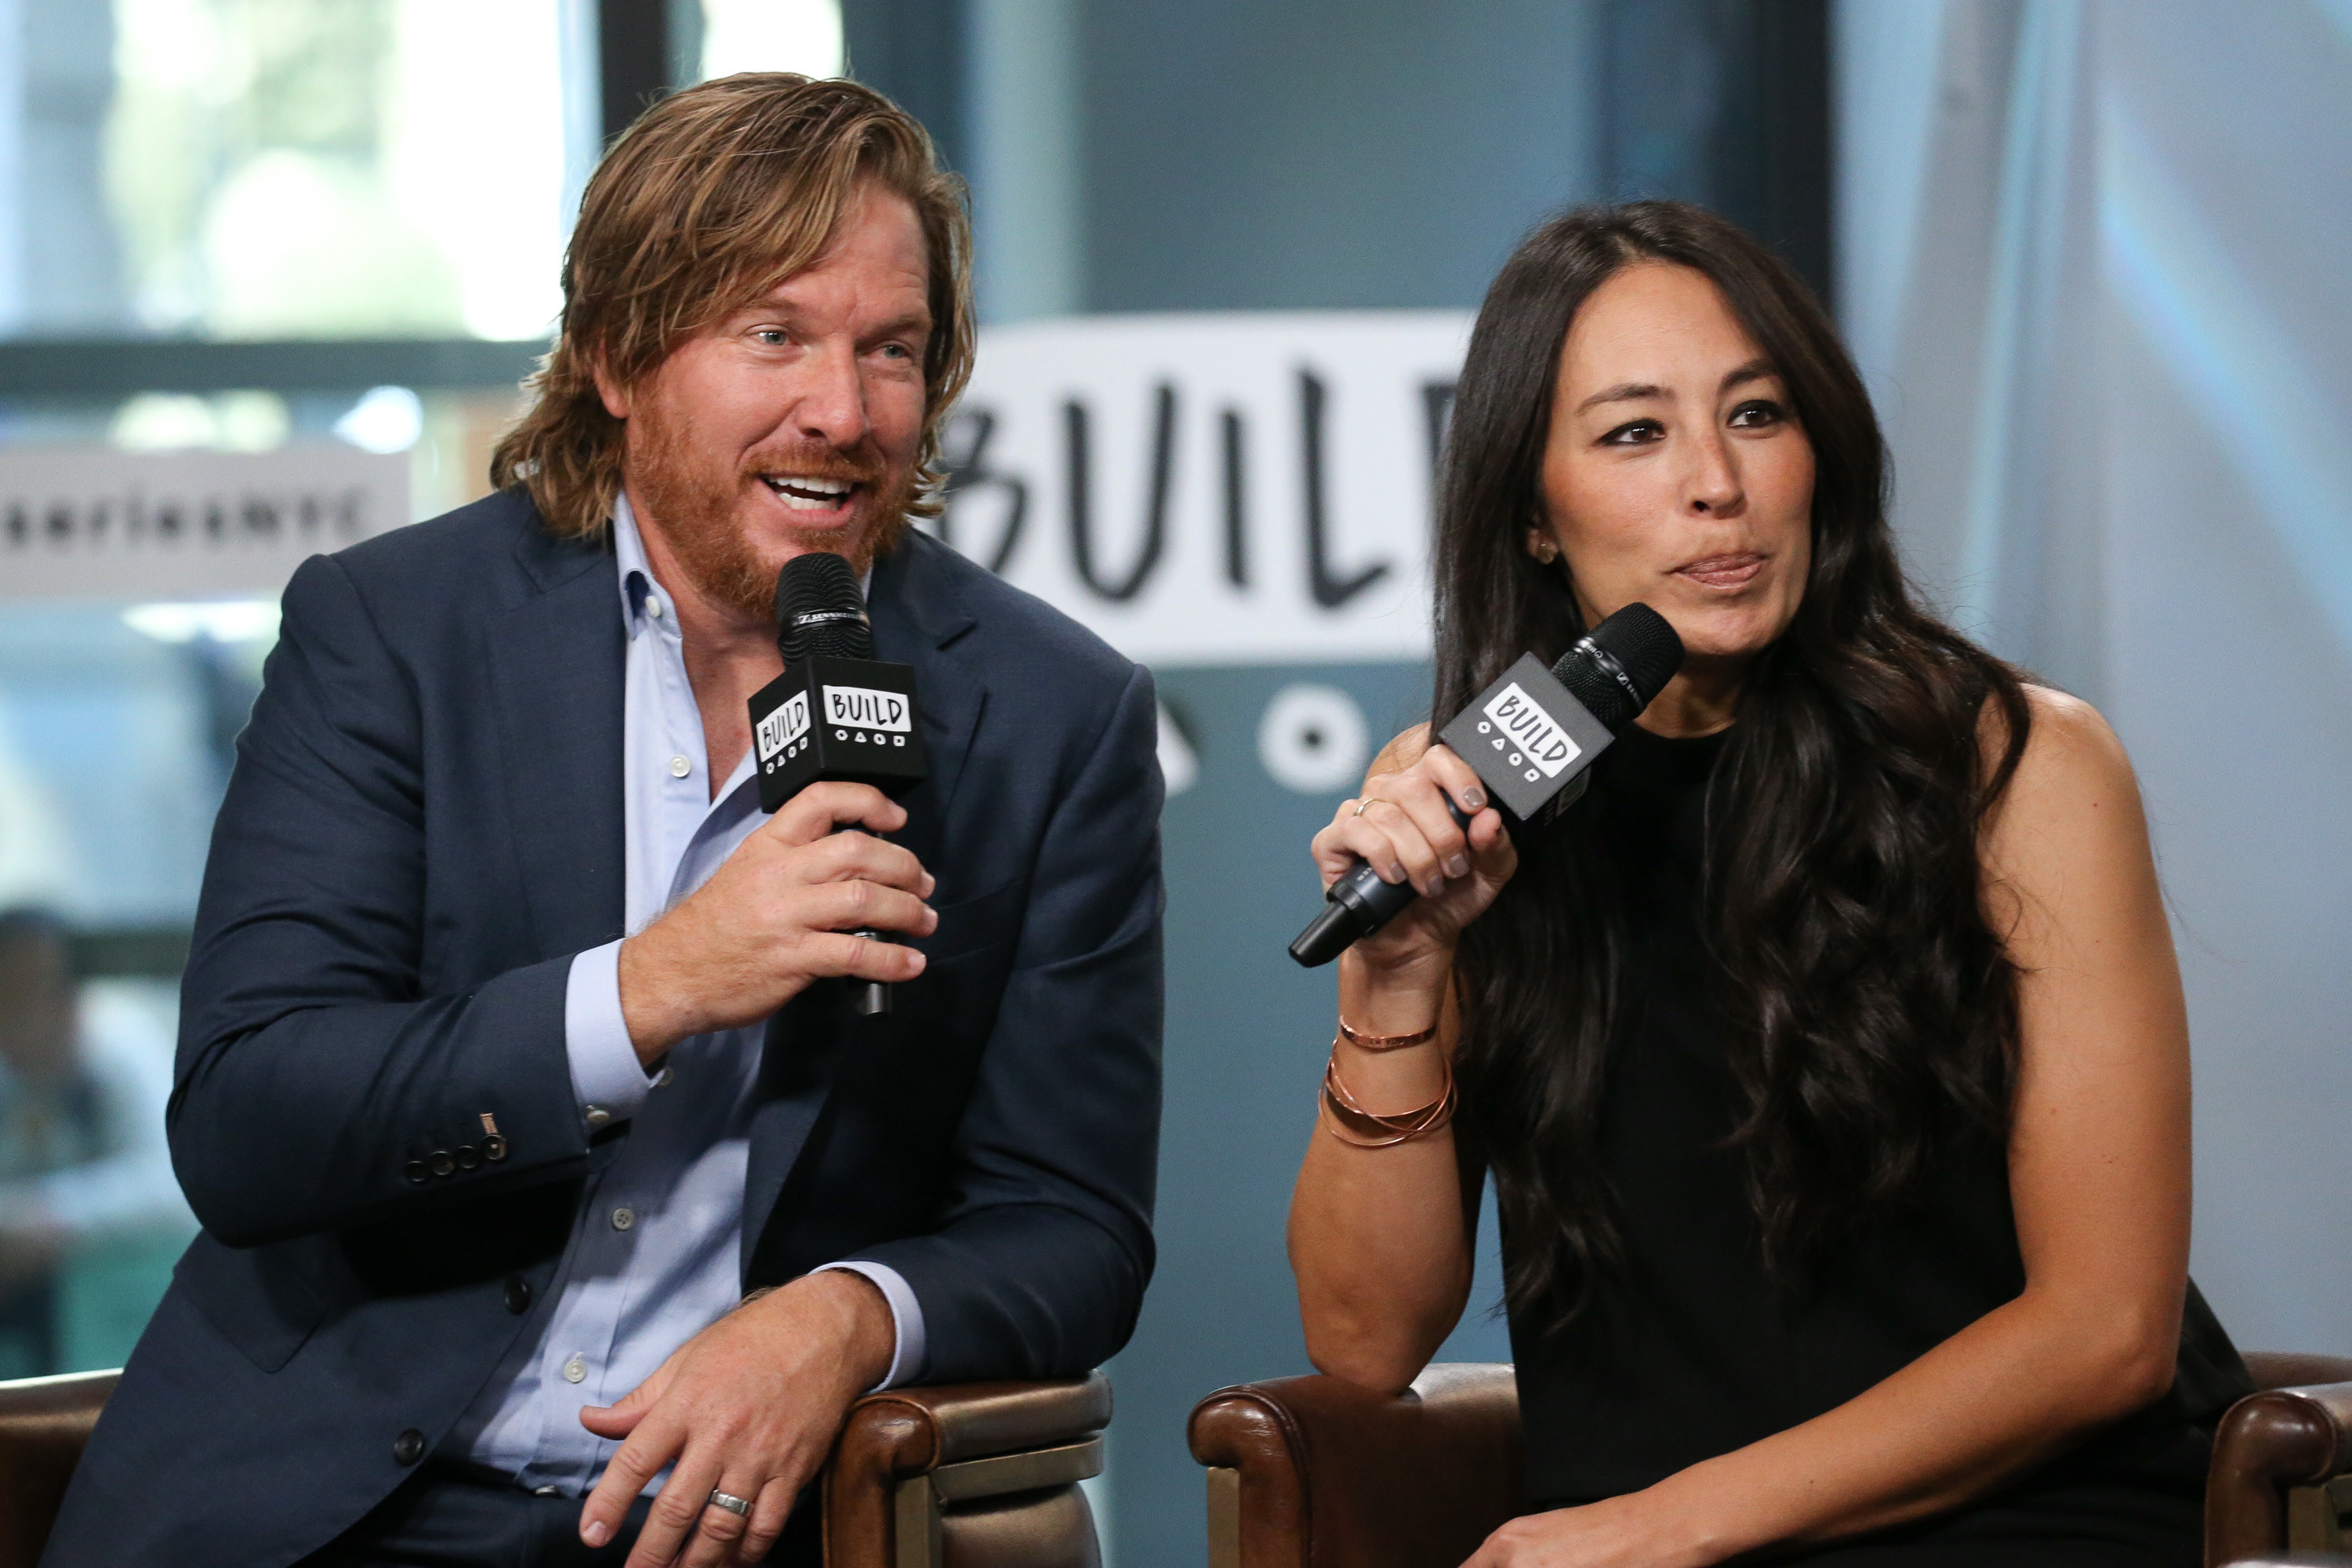 Chip Gaines and Joanna Gaines speak at an event